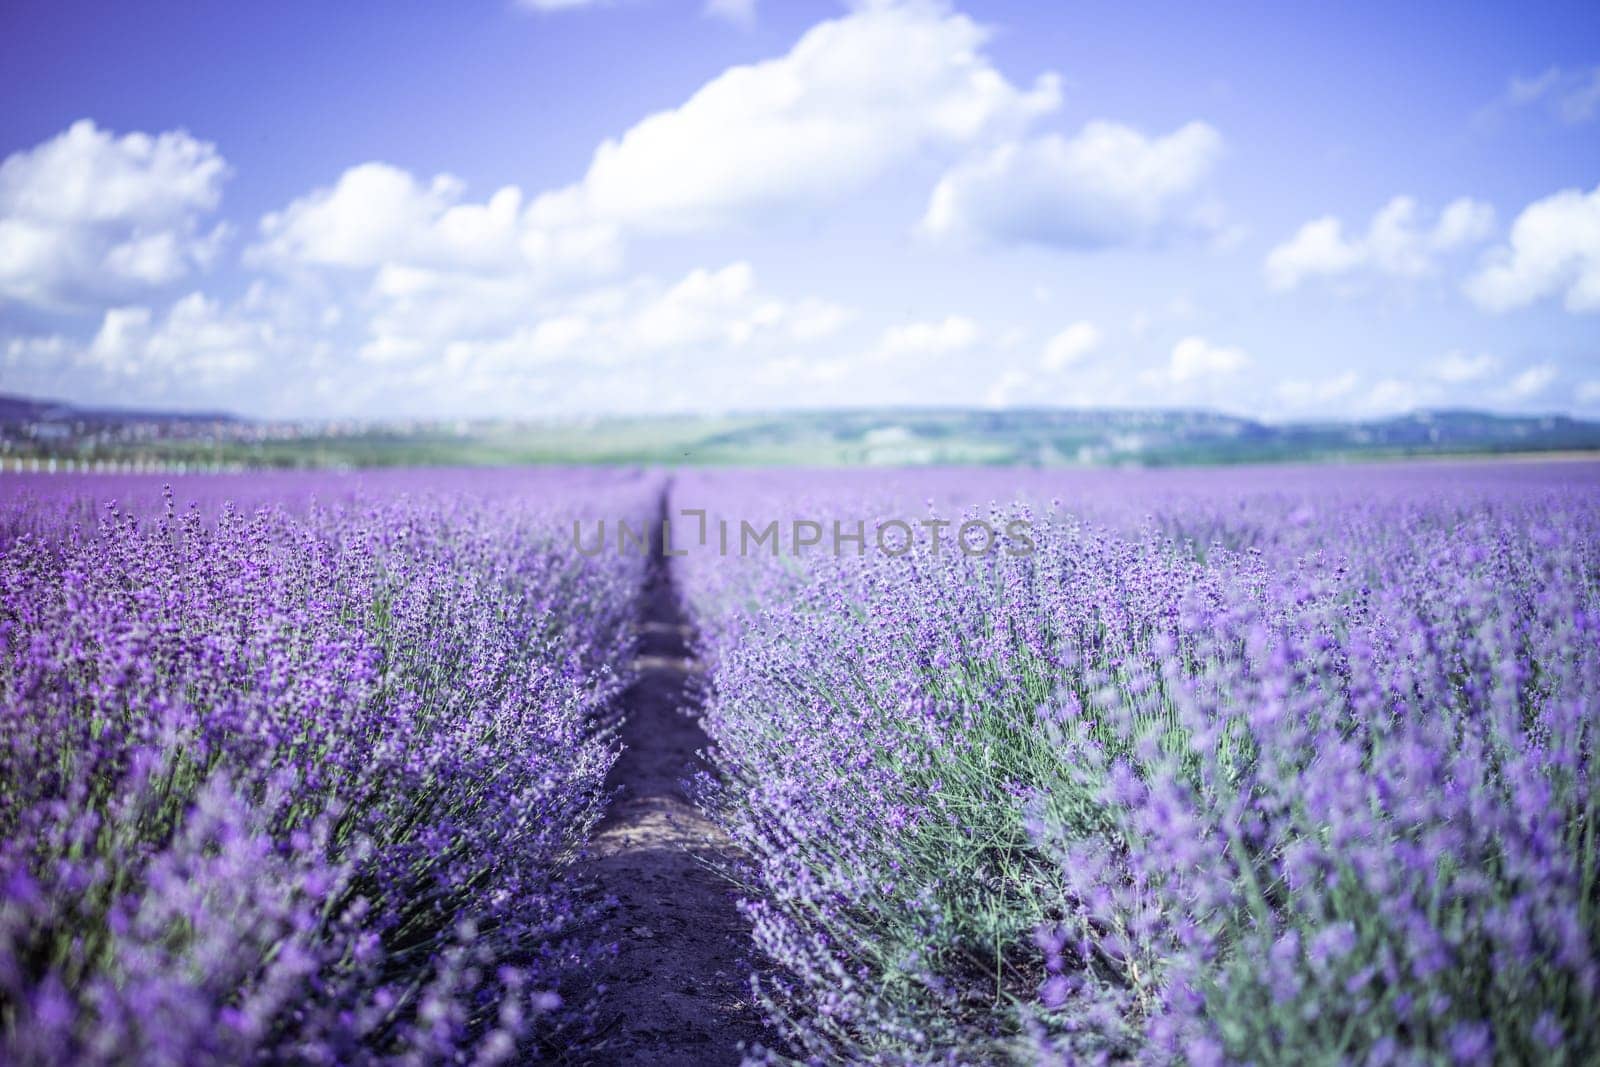 Lavender Blooms, a picturesque field of blooming lavender under a partly cloudy sky. Captured during the day, highlighting natural beauty and agricultural potential.